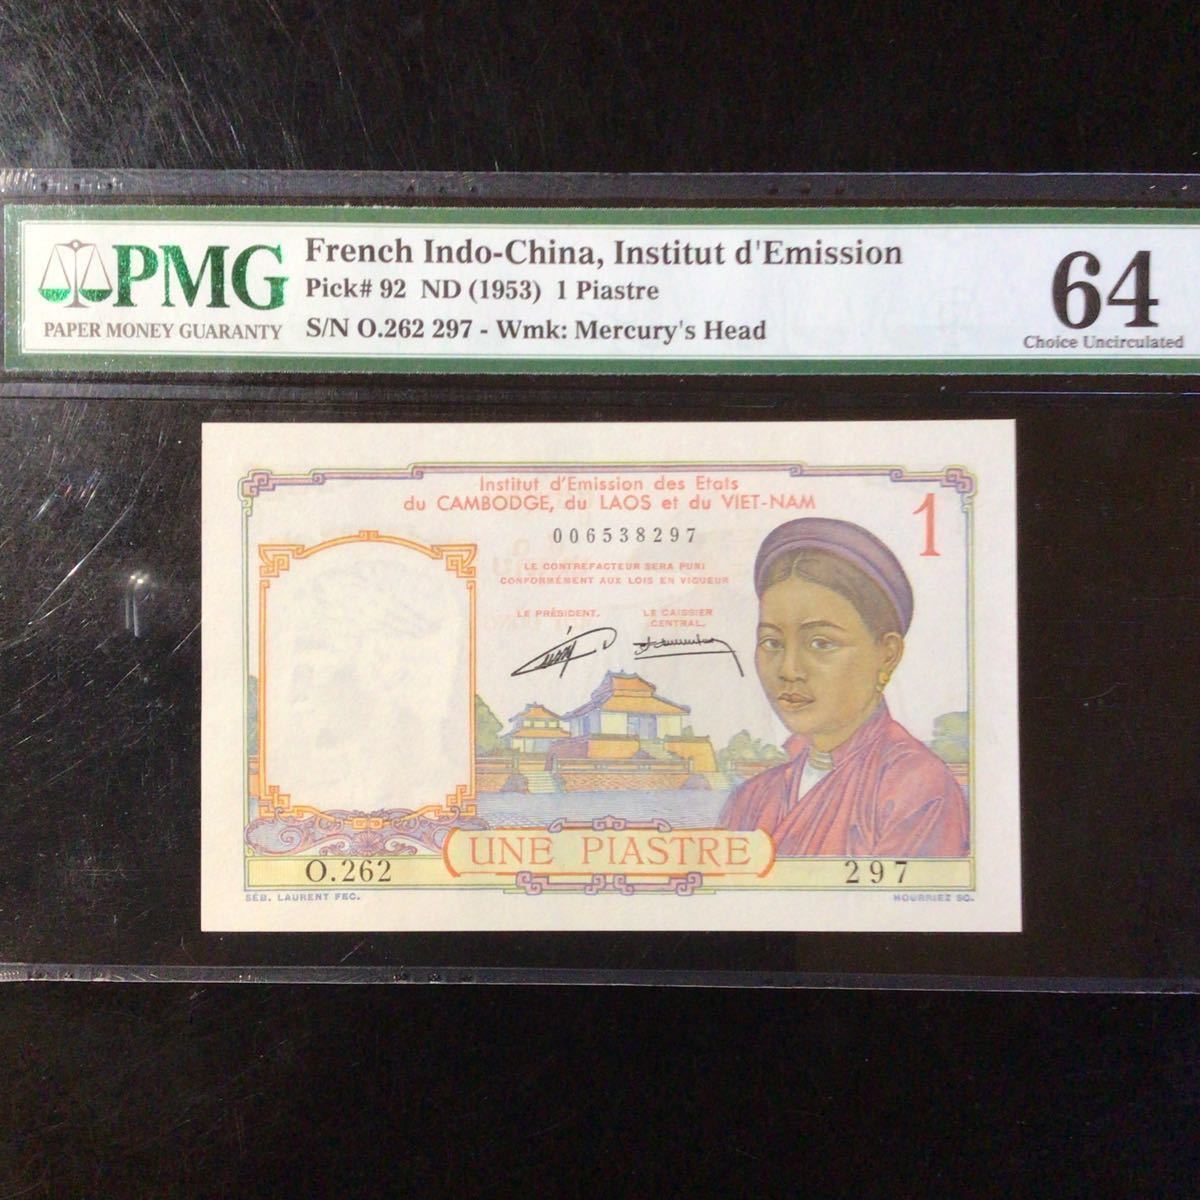 World Banknote Grading FRENCH INDO－CHINA《Institut d'Emission》1 Piastre【1953】『PMG Grading Choice Uncirculated 64』